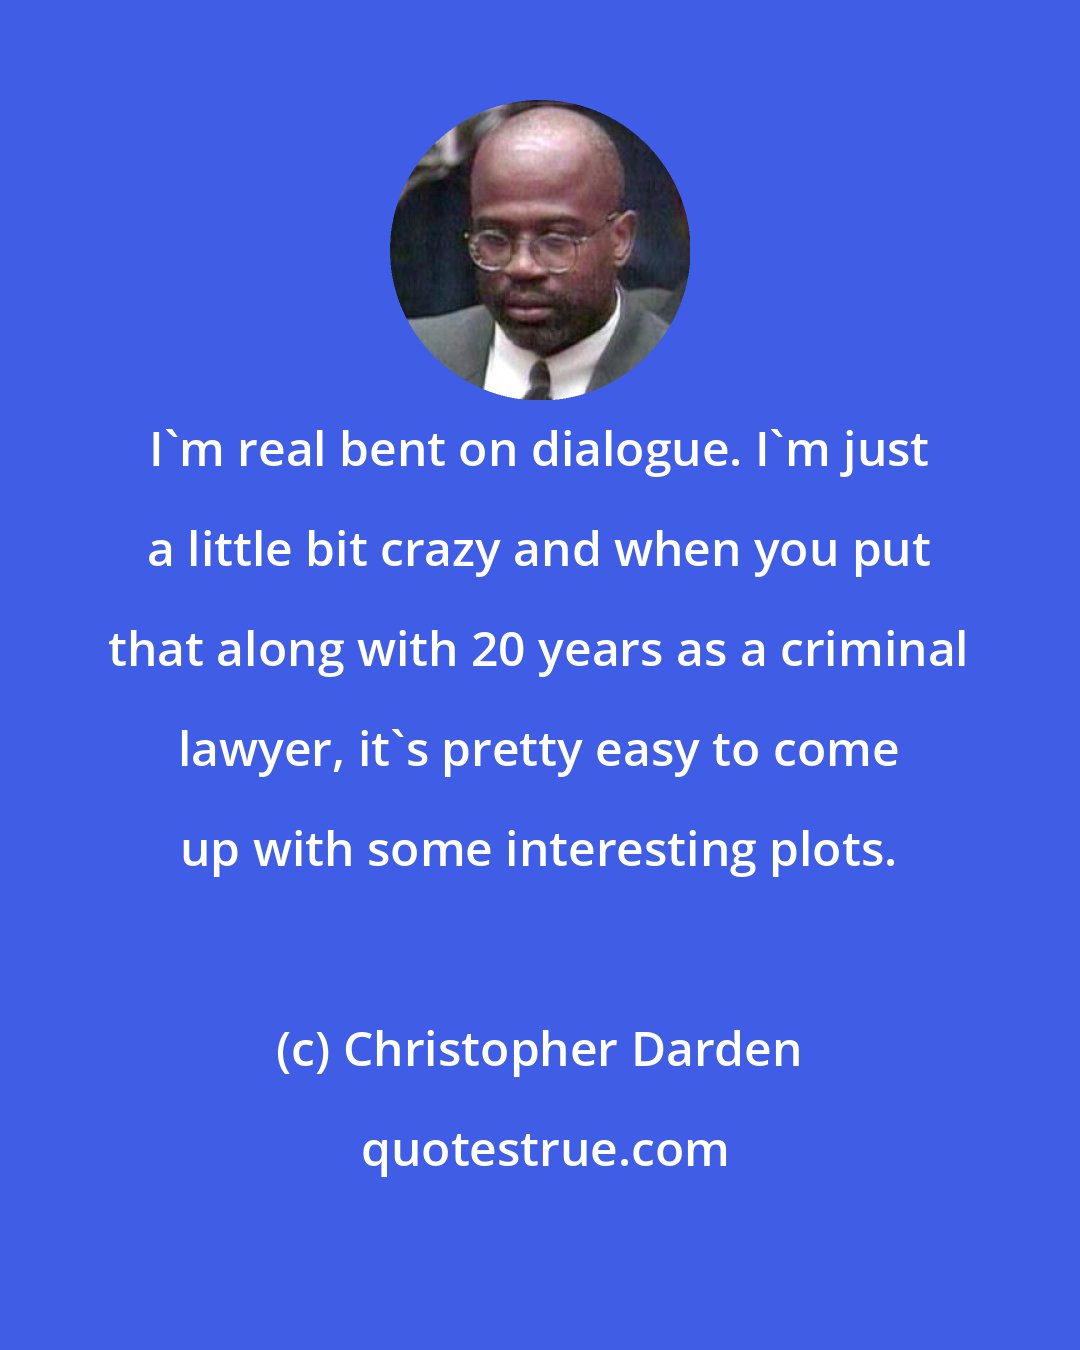 Christopher Darden: I'm real bent on dialogue. I'm just a little bit crazy and when you put that along with 20 years as a criminal lawyer, it's pretty easy to come up with some interesting plots.